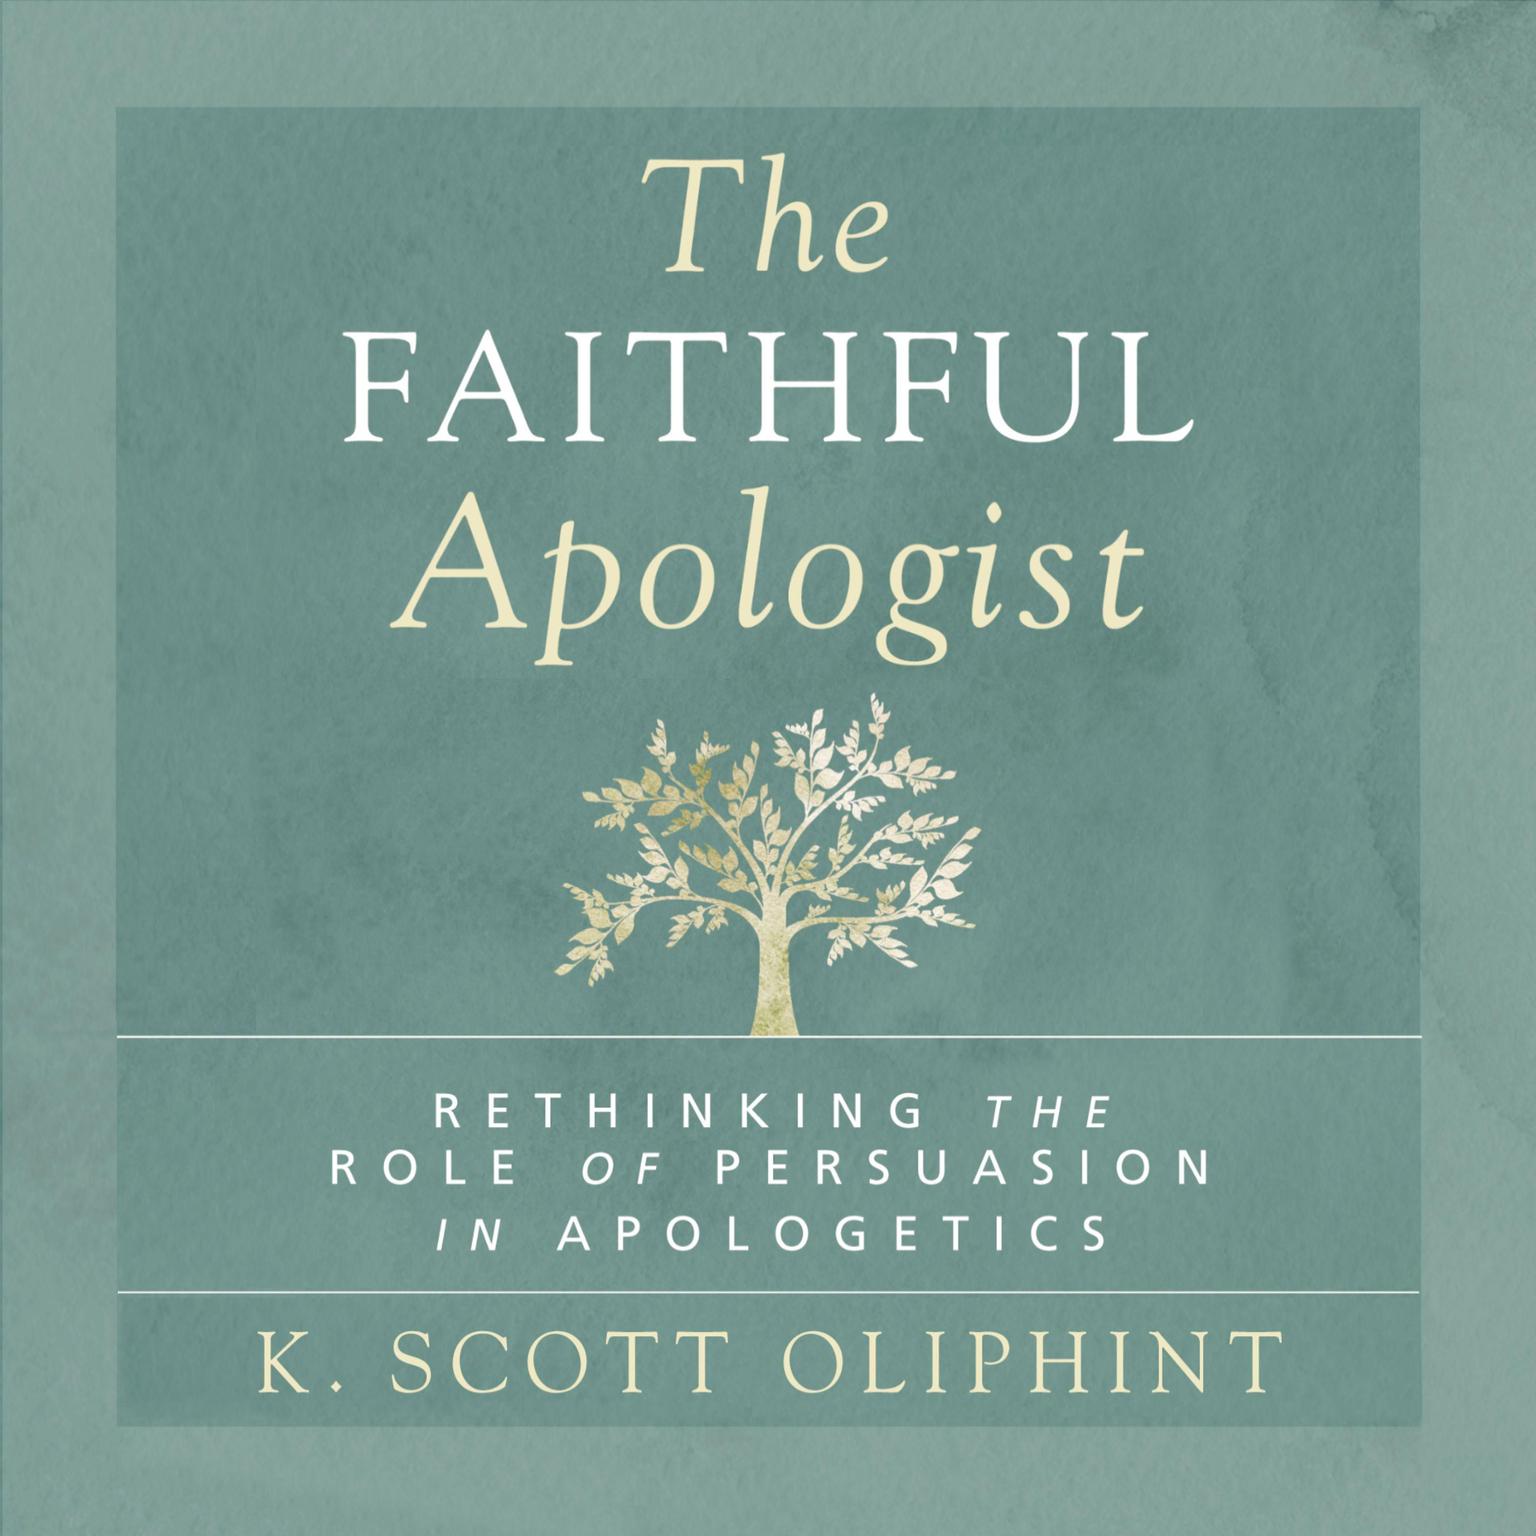 The Faithful Apologist: Rethinking the Role of Persuasion in Apologetics Audiobook, by K. Scott Oliphint